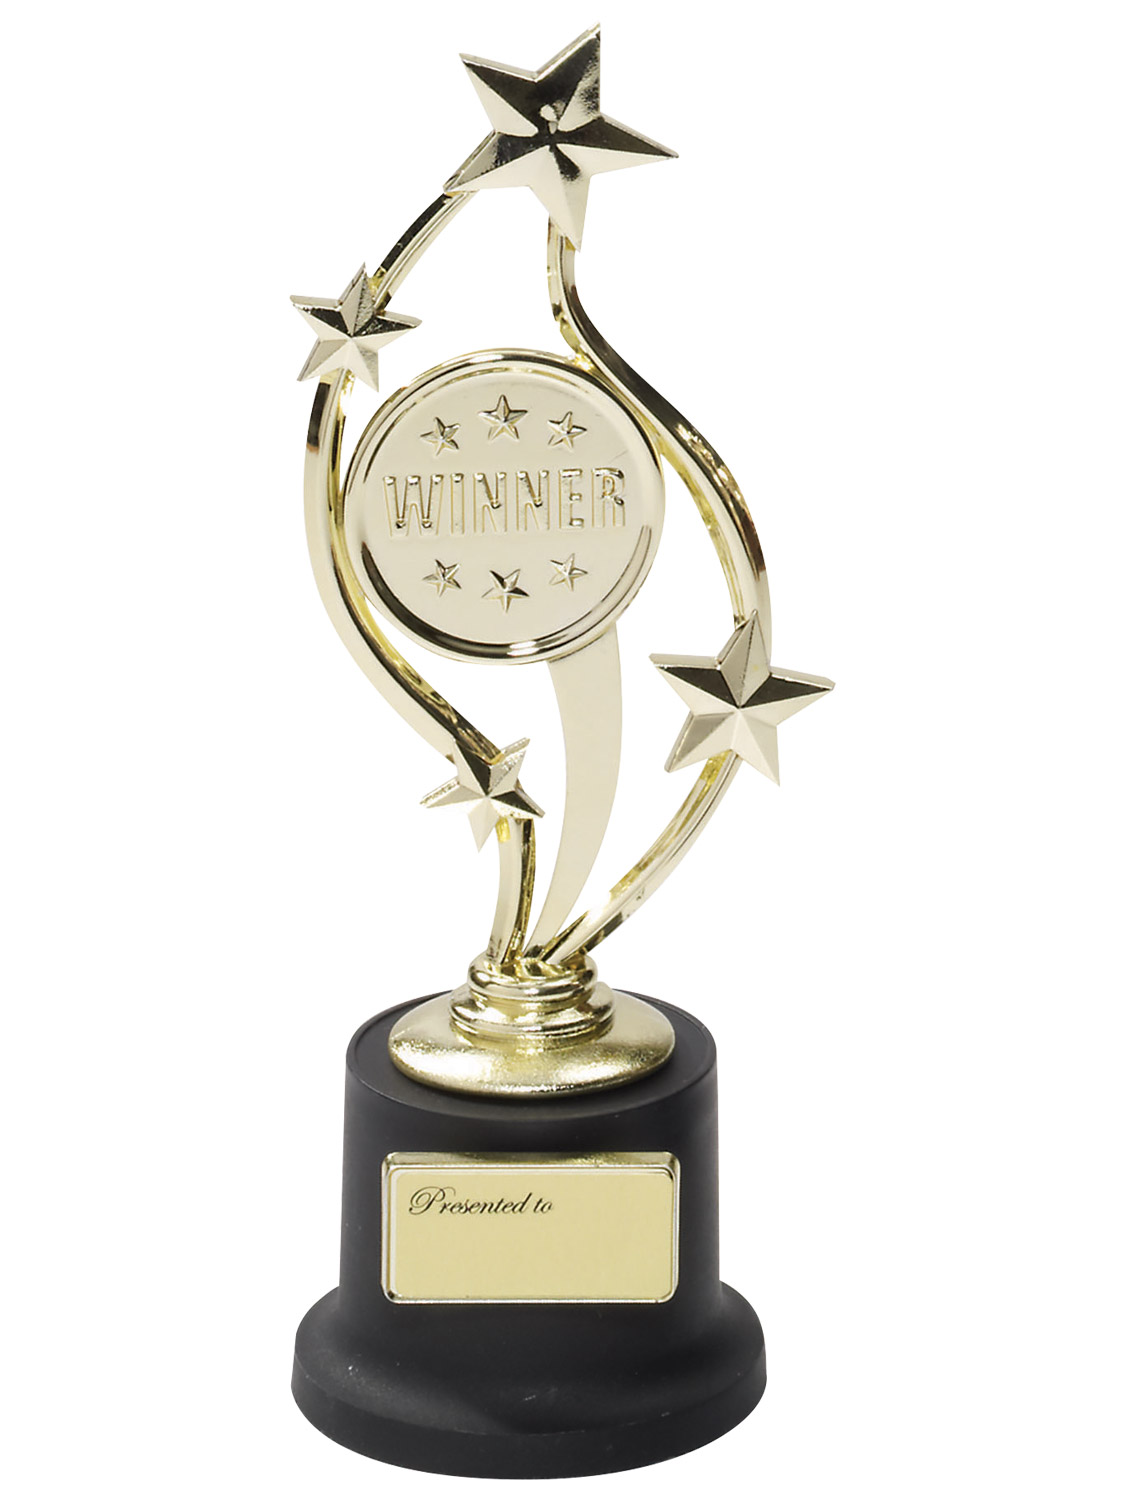 Bowling Trophy Accessory Gift Novelty Gold Award 